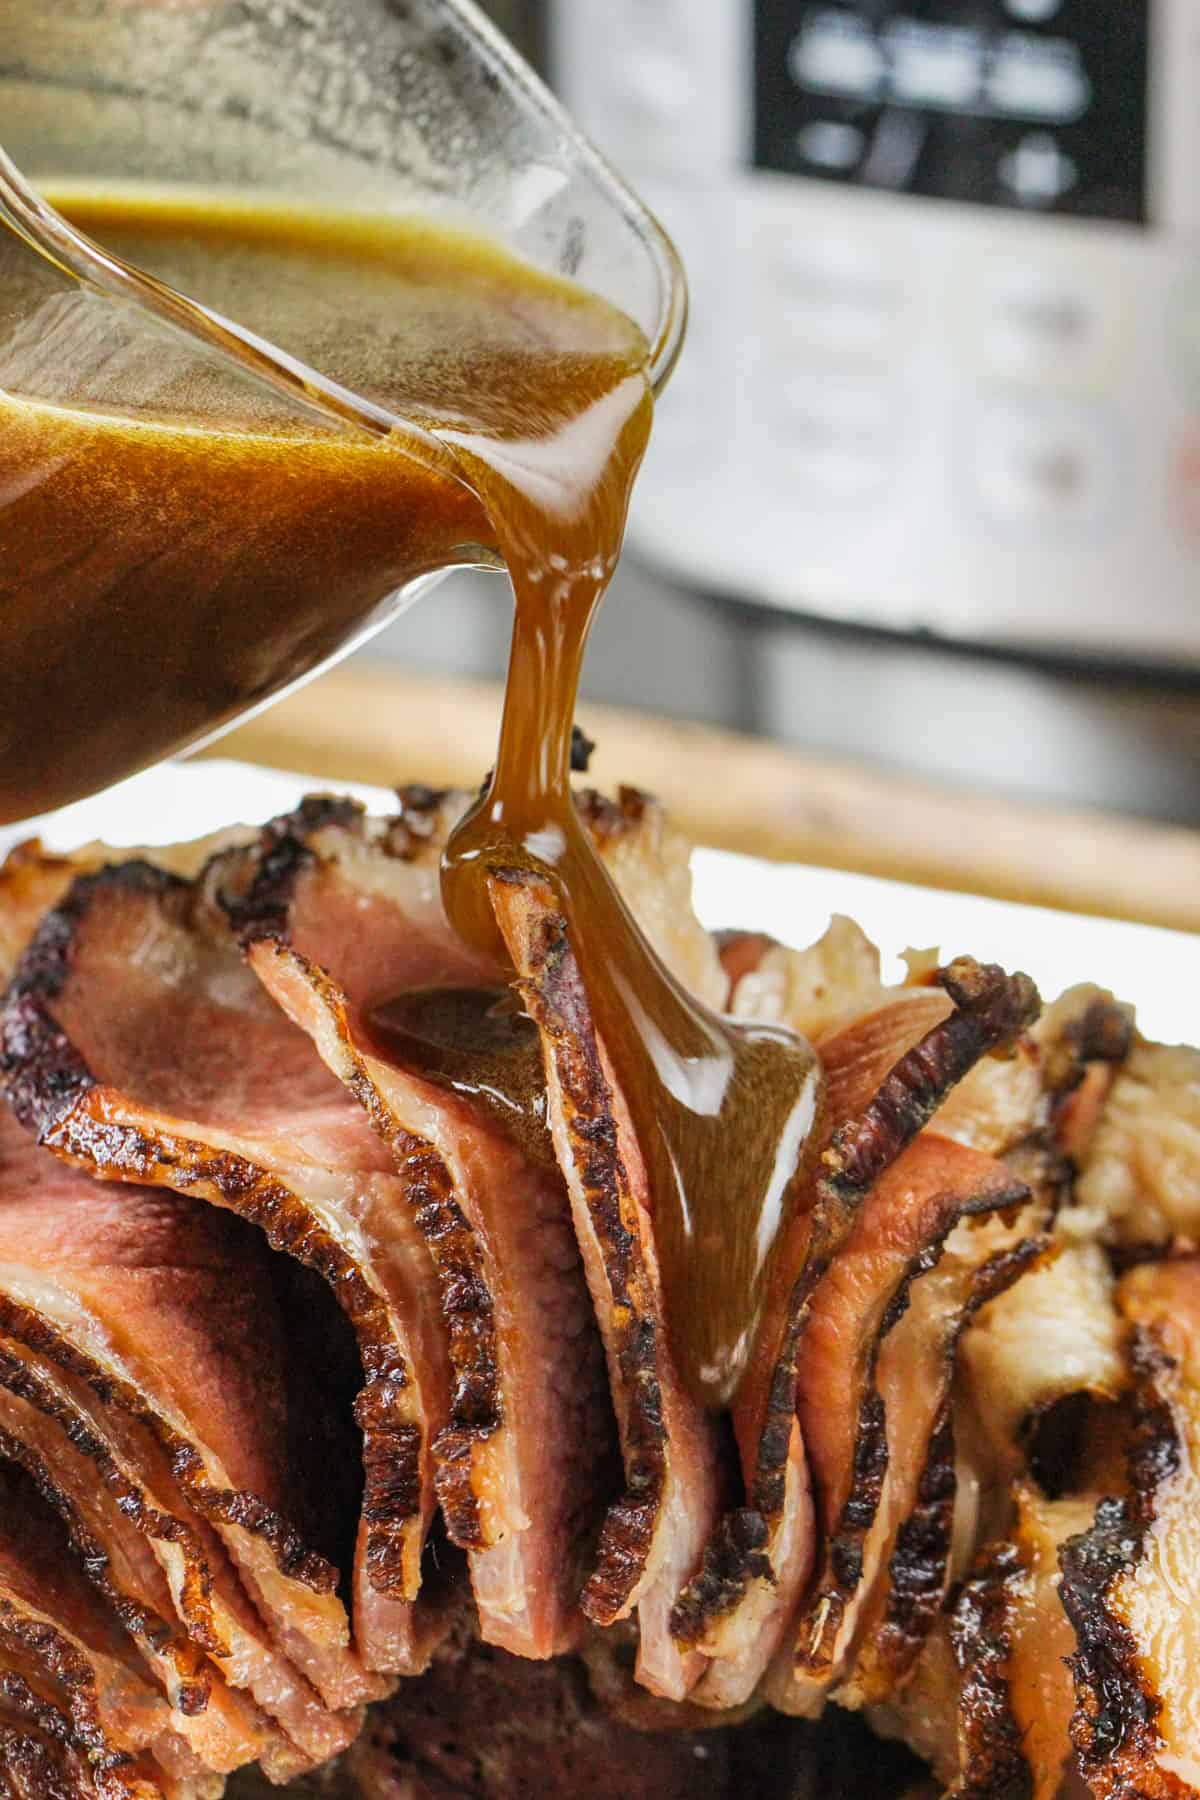 https://ourzestylife.com/wp-content/uploads/2021/11/Instant-Pot-Ham-with-Brown-Sugar-Glaze-OurZestyLife-7.jpg